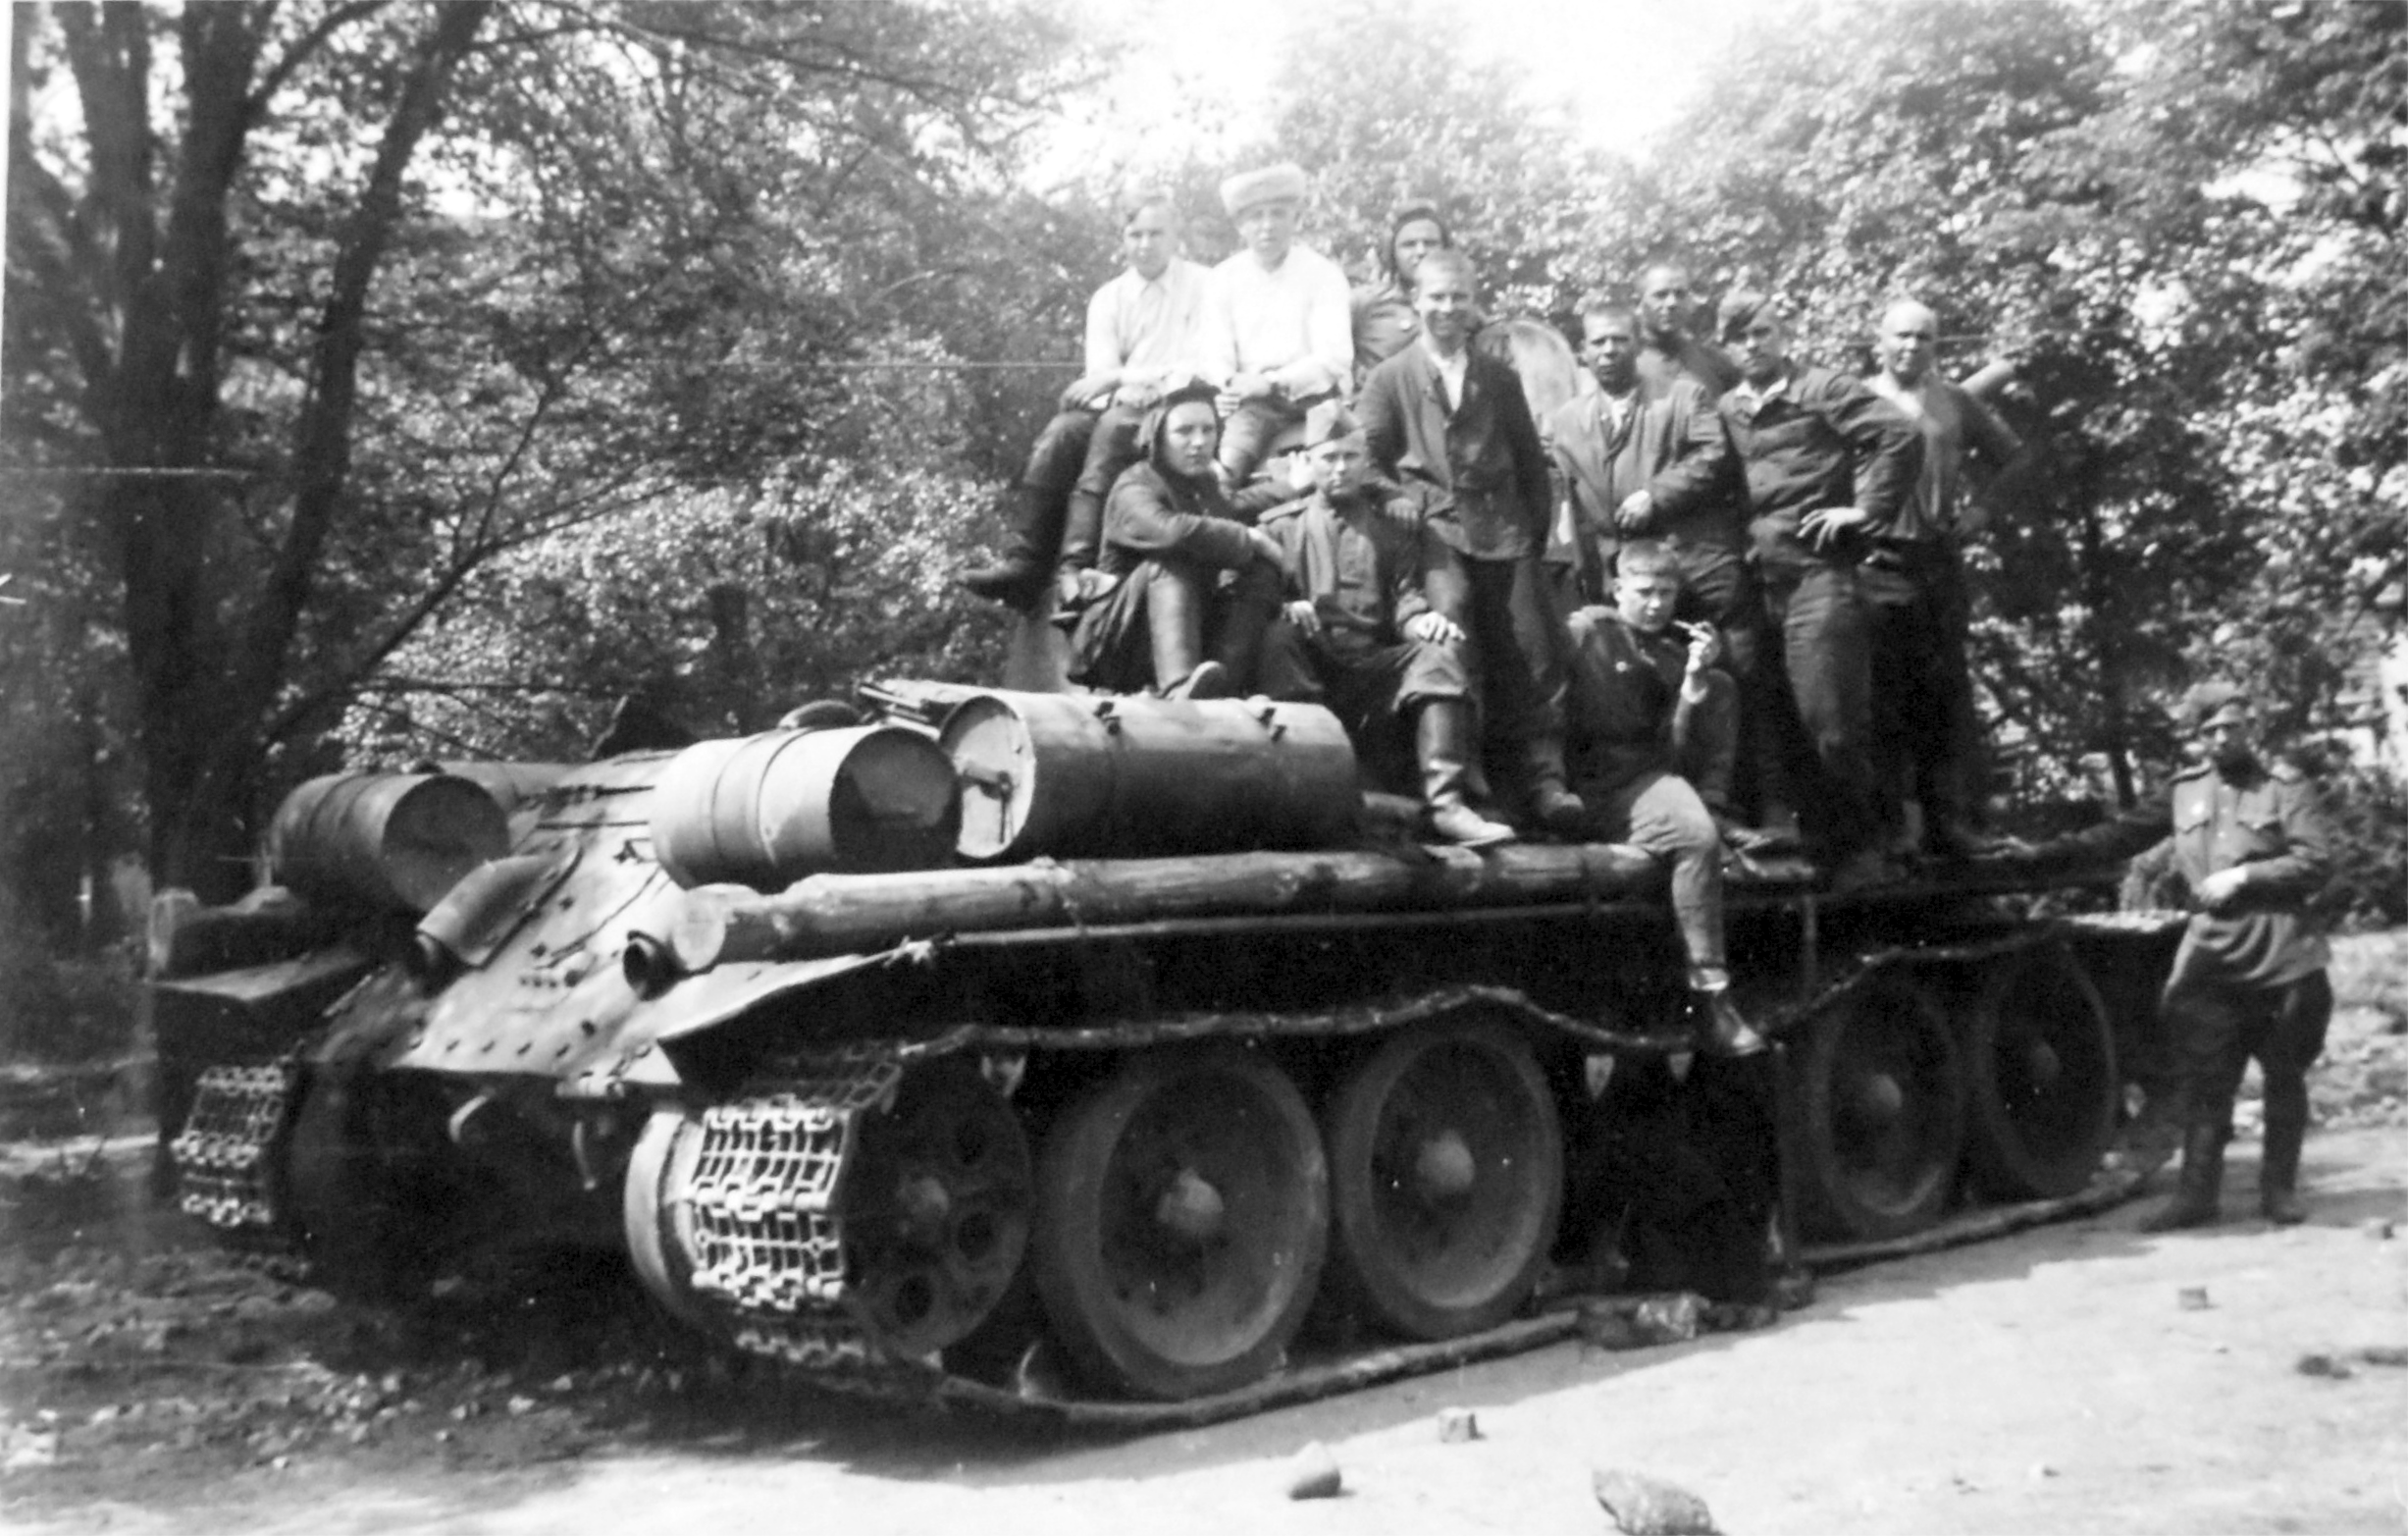 Tank Archives on Twitter: "Tank suspensions are pretty tough and can  usually run with one wheel missing, at least for a short time. Here we see  a T-34-85 tank without one of